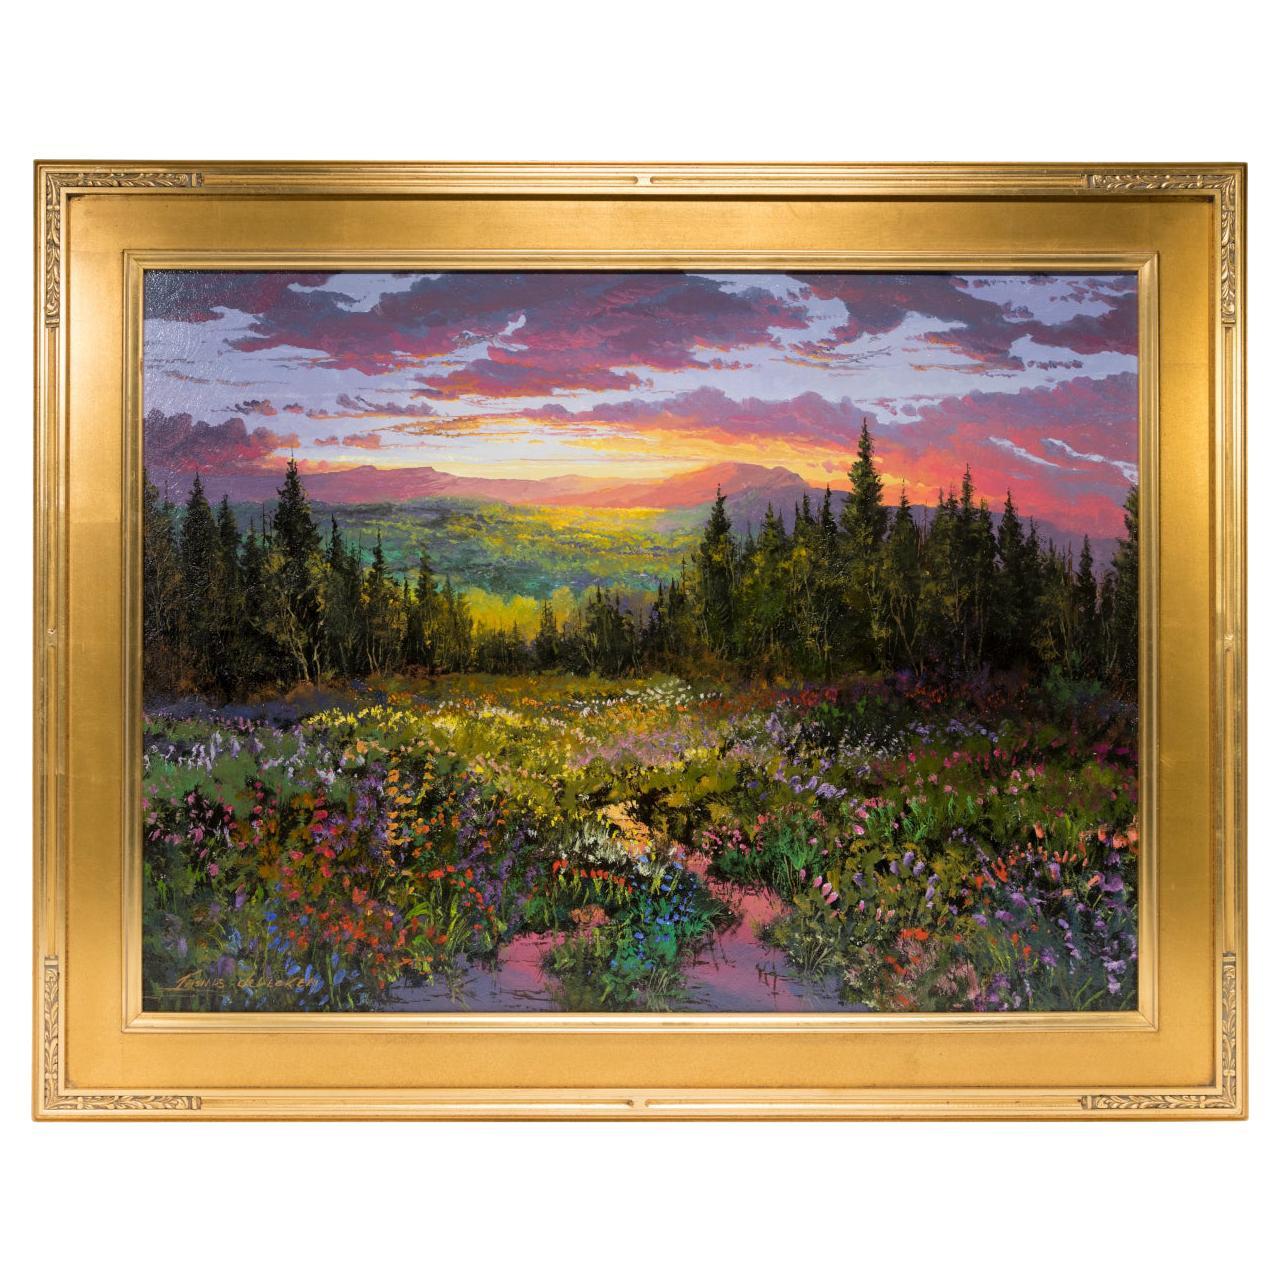 Original Painting "End of a Serene Day by Thomas dedecker For Sale